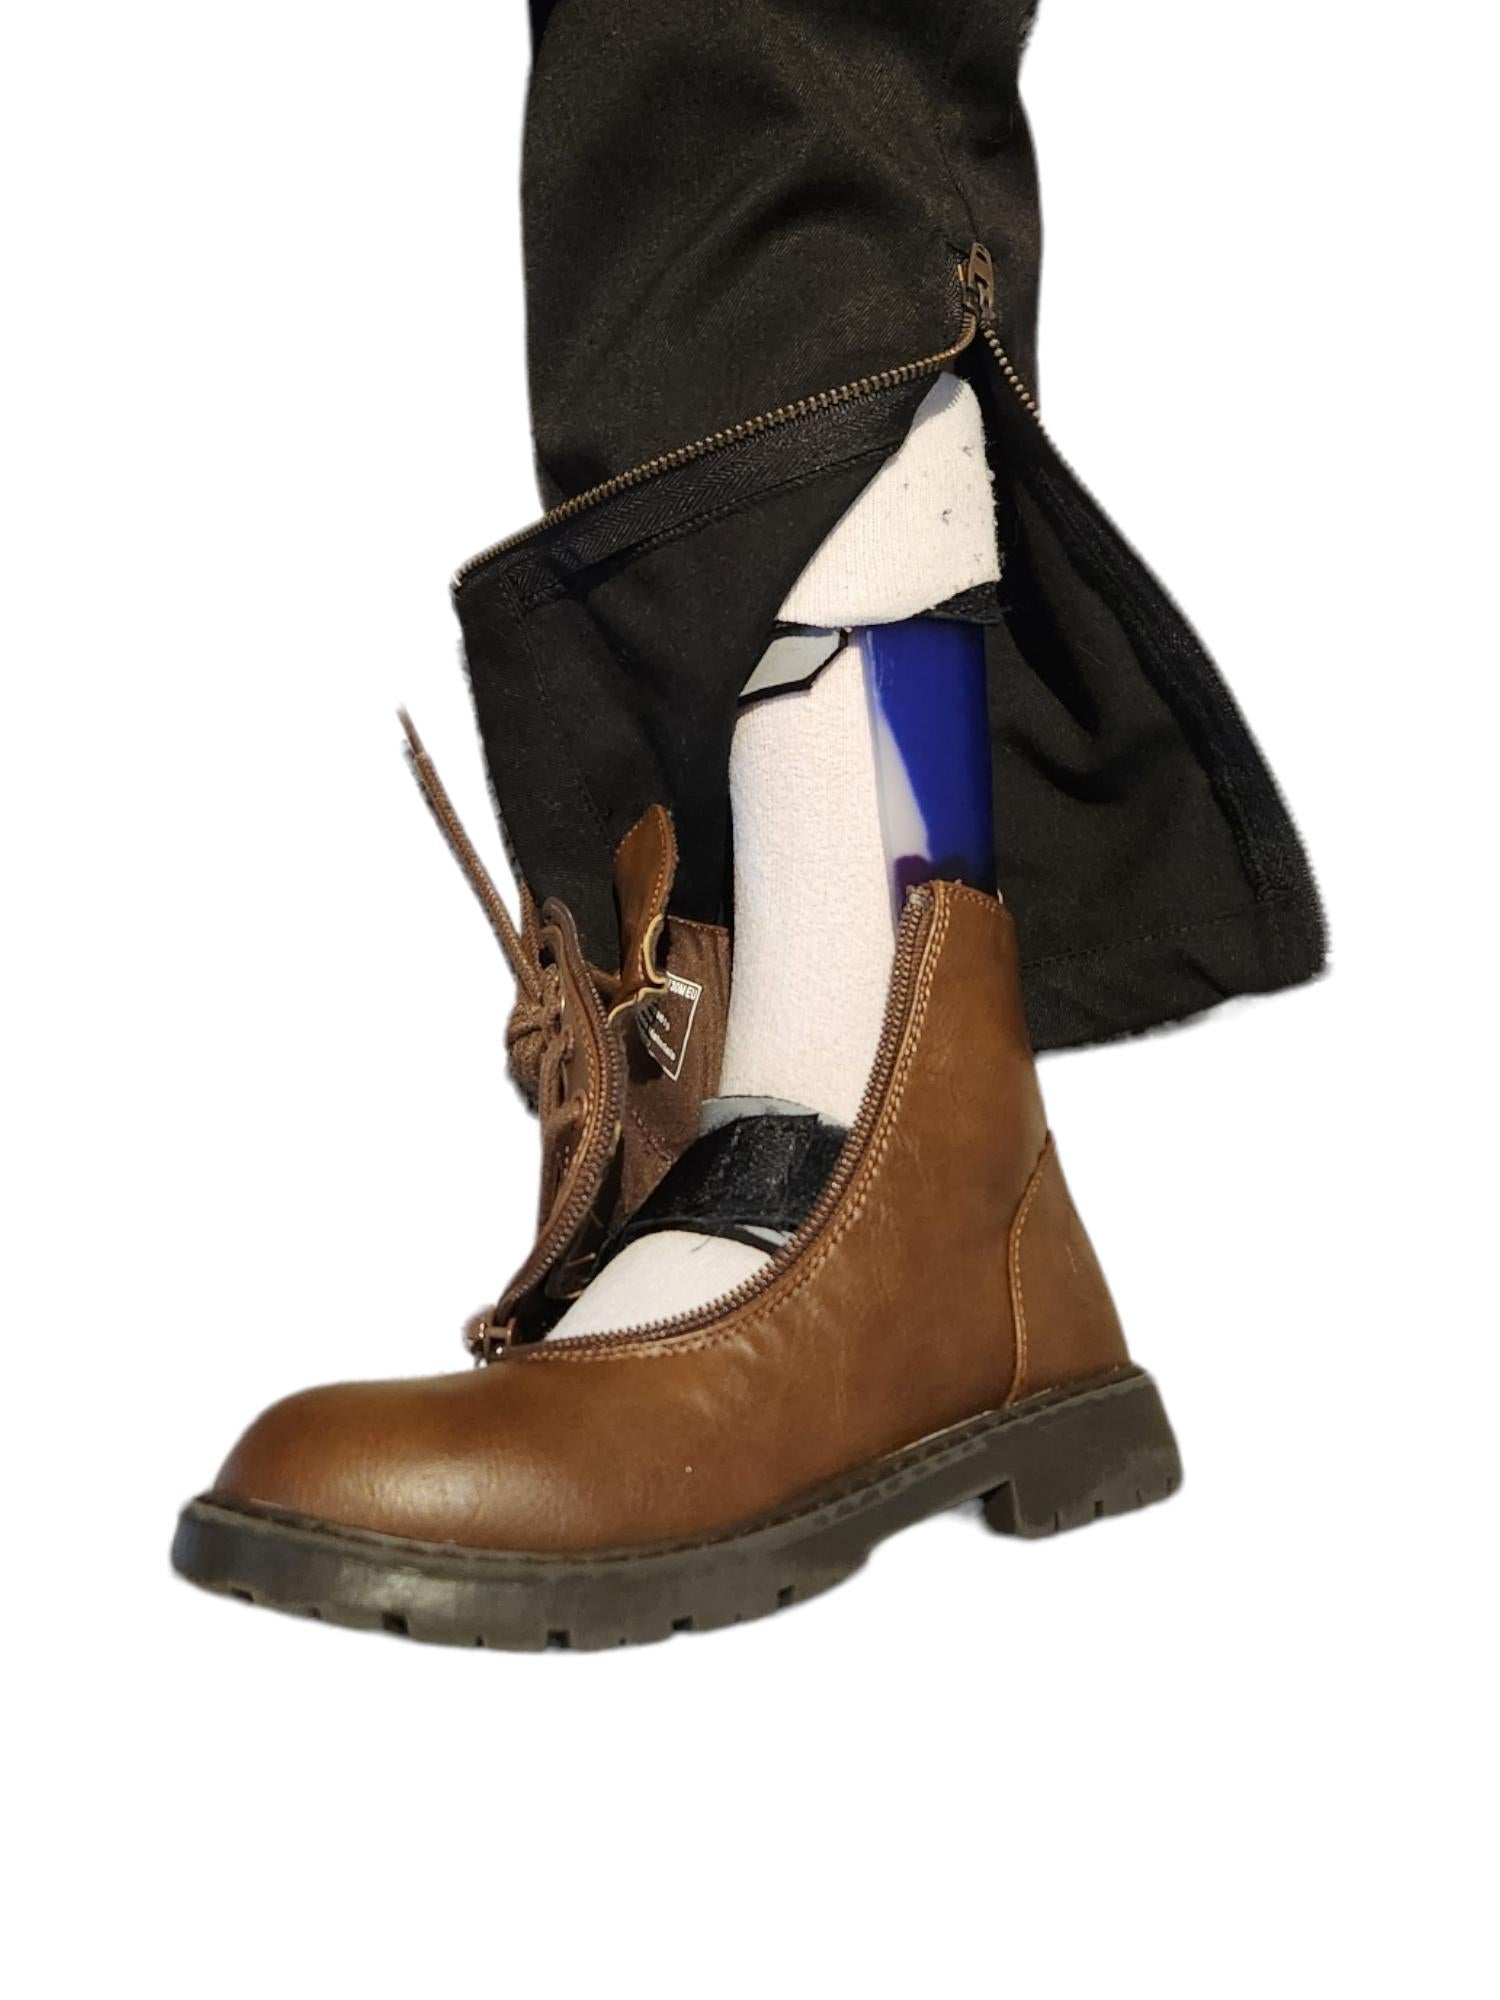 Section of Lloyd black trouser opened by zip access at ankle with ankle foot orthotic, adaptive brown boot and white socks